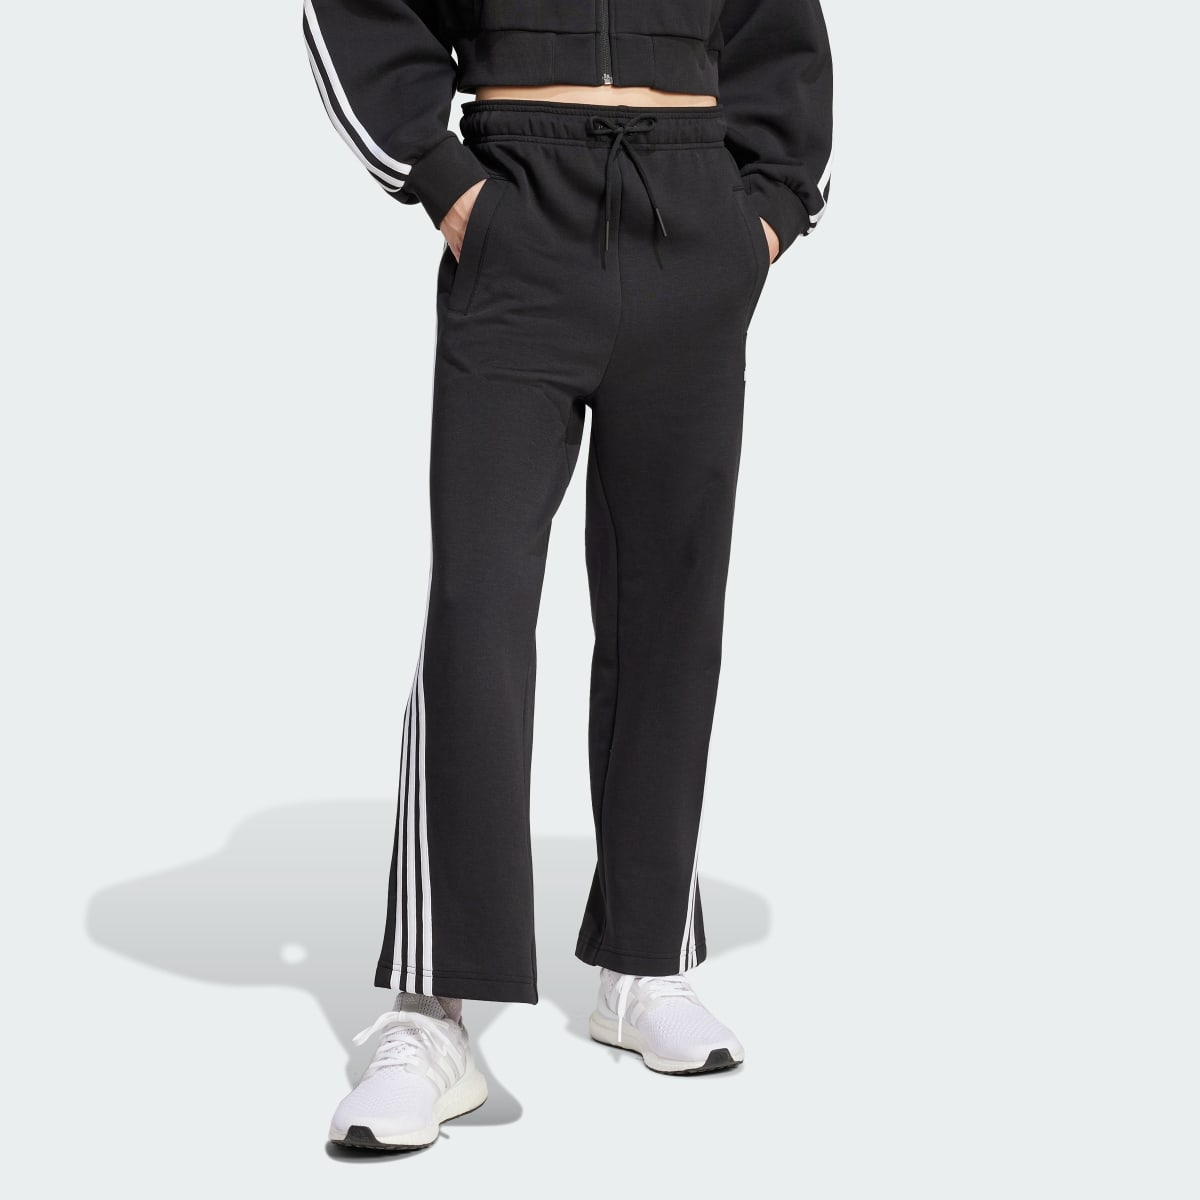 Adidas Future Icons 3-Stripes Open Hem Pants - IN9474